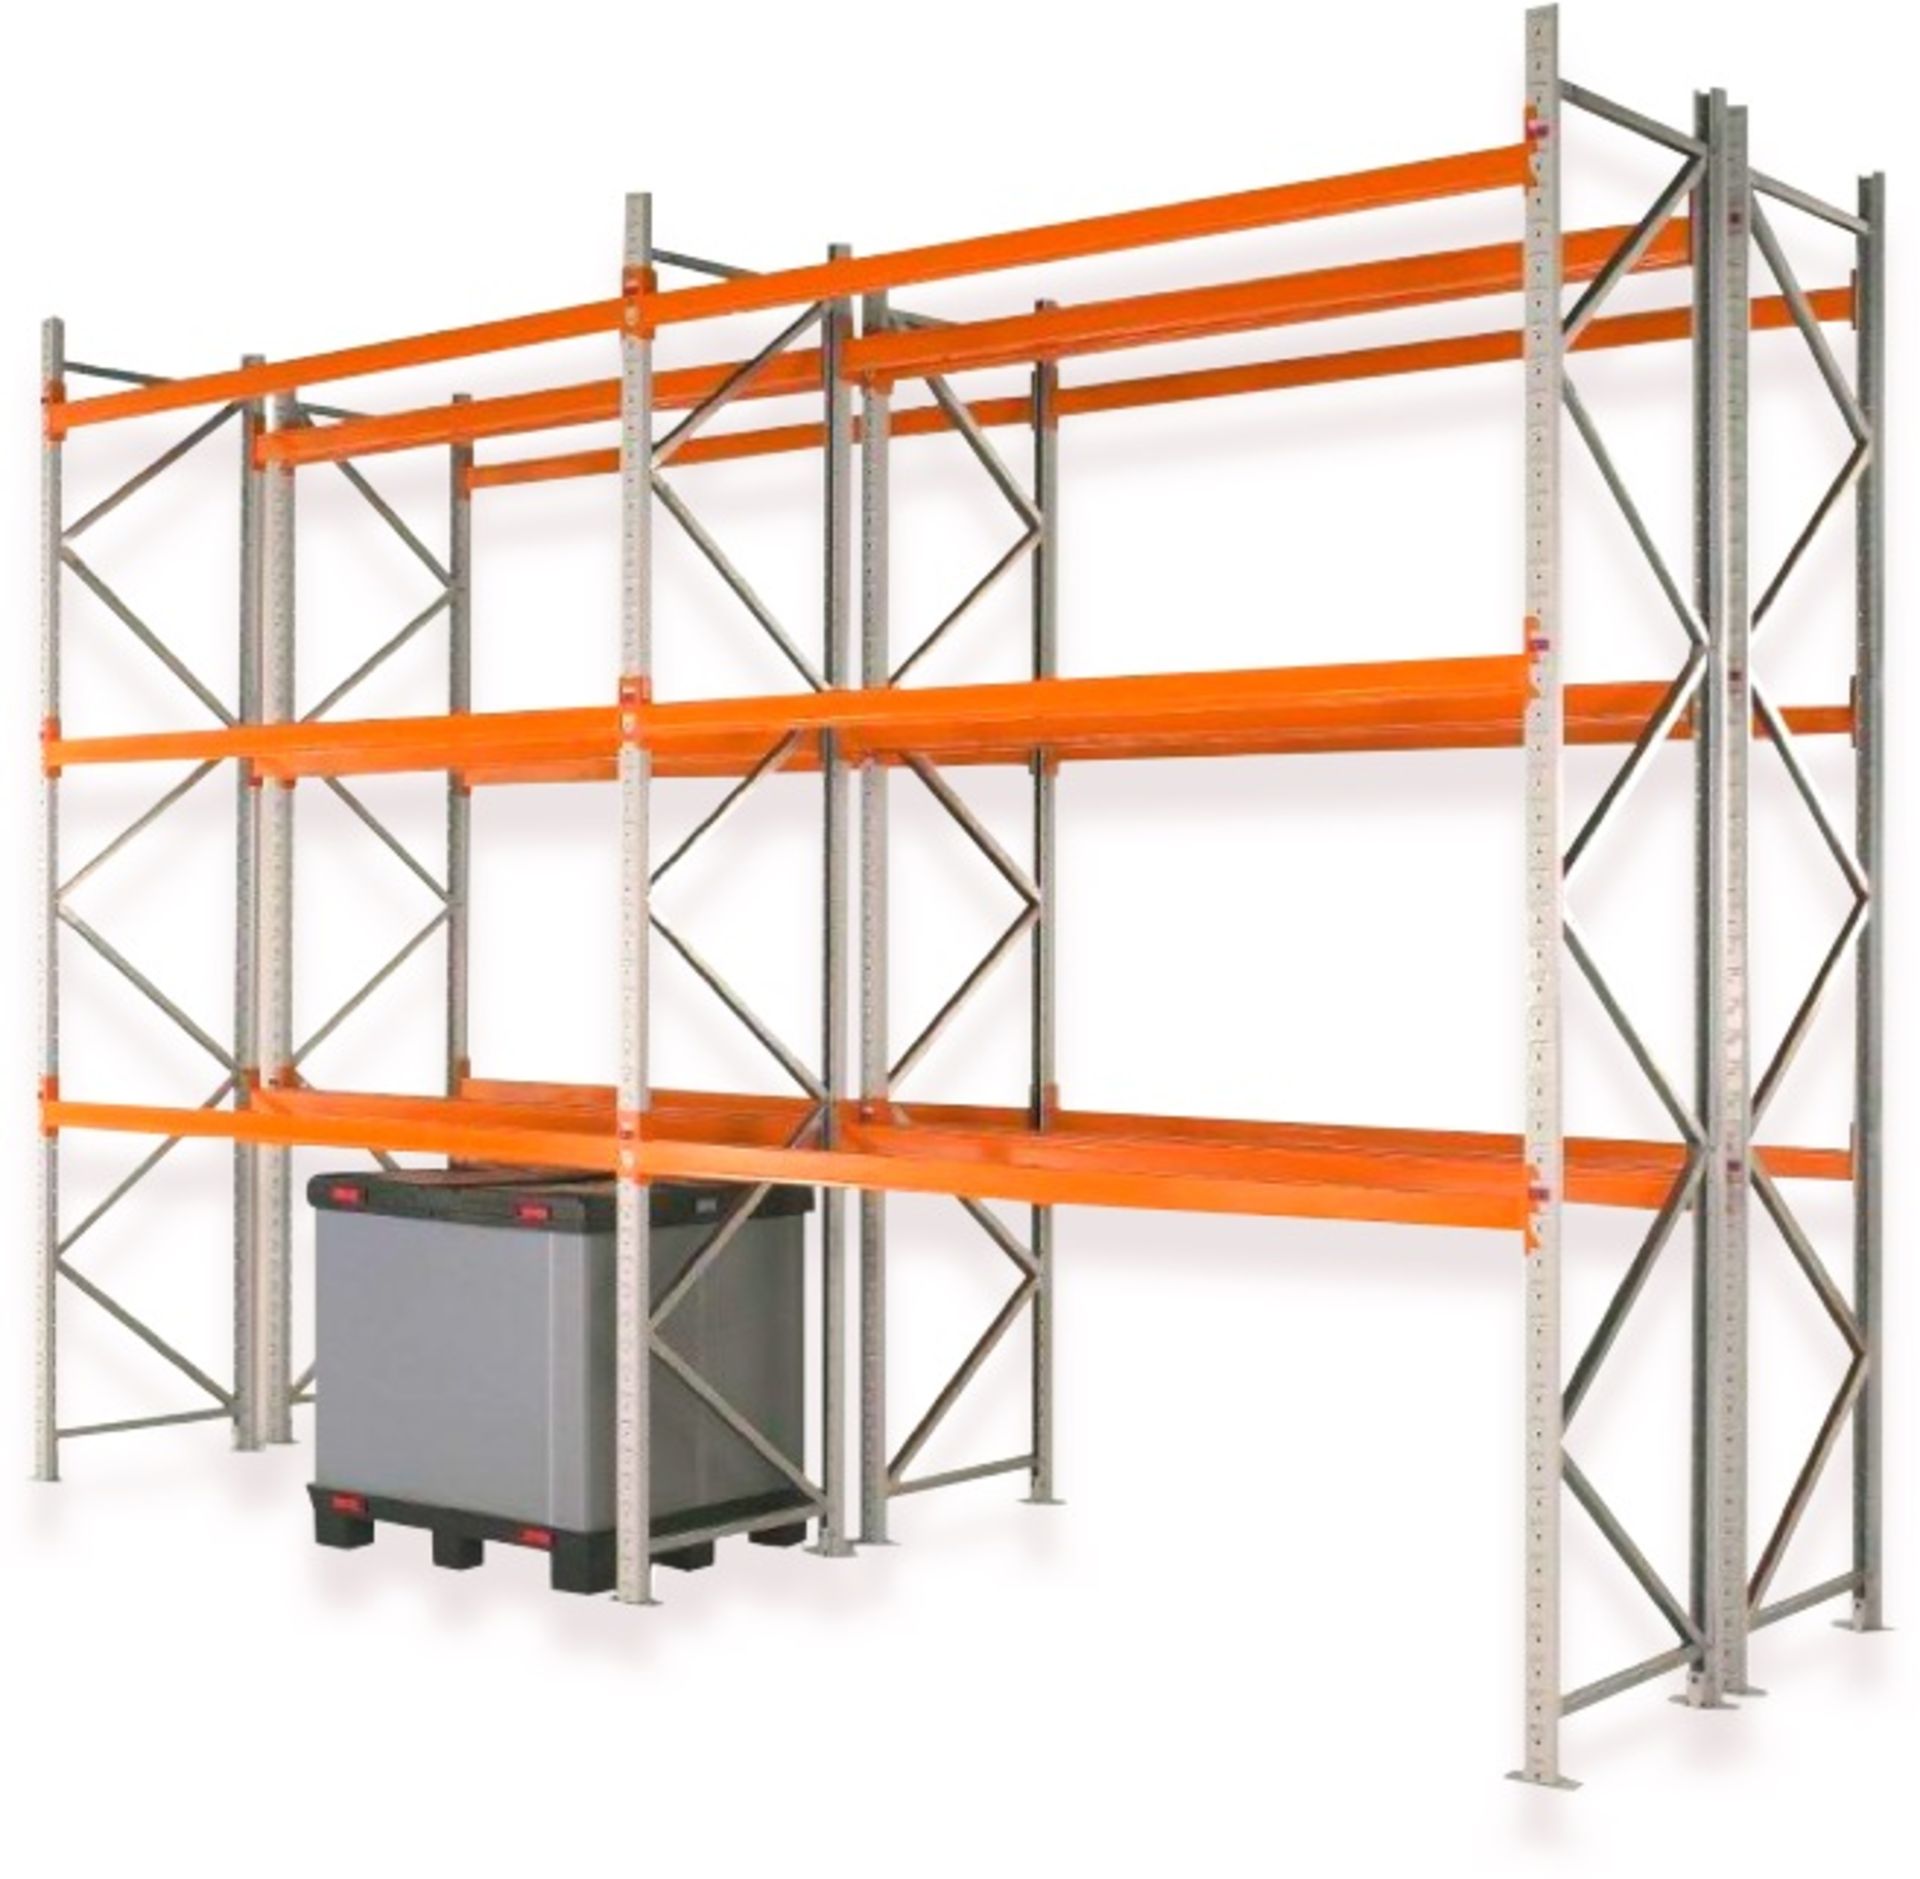 5 x Bays of Apex Pallet Racking - Includes 6 x Apex 16 UK 16,000kg Capacity Uprights and 32 x Apex